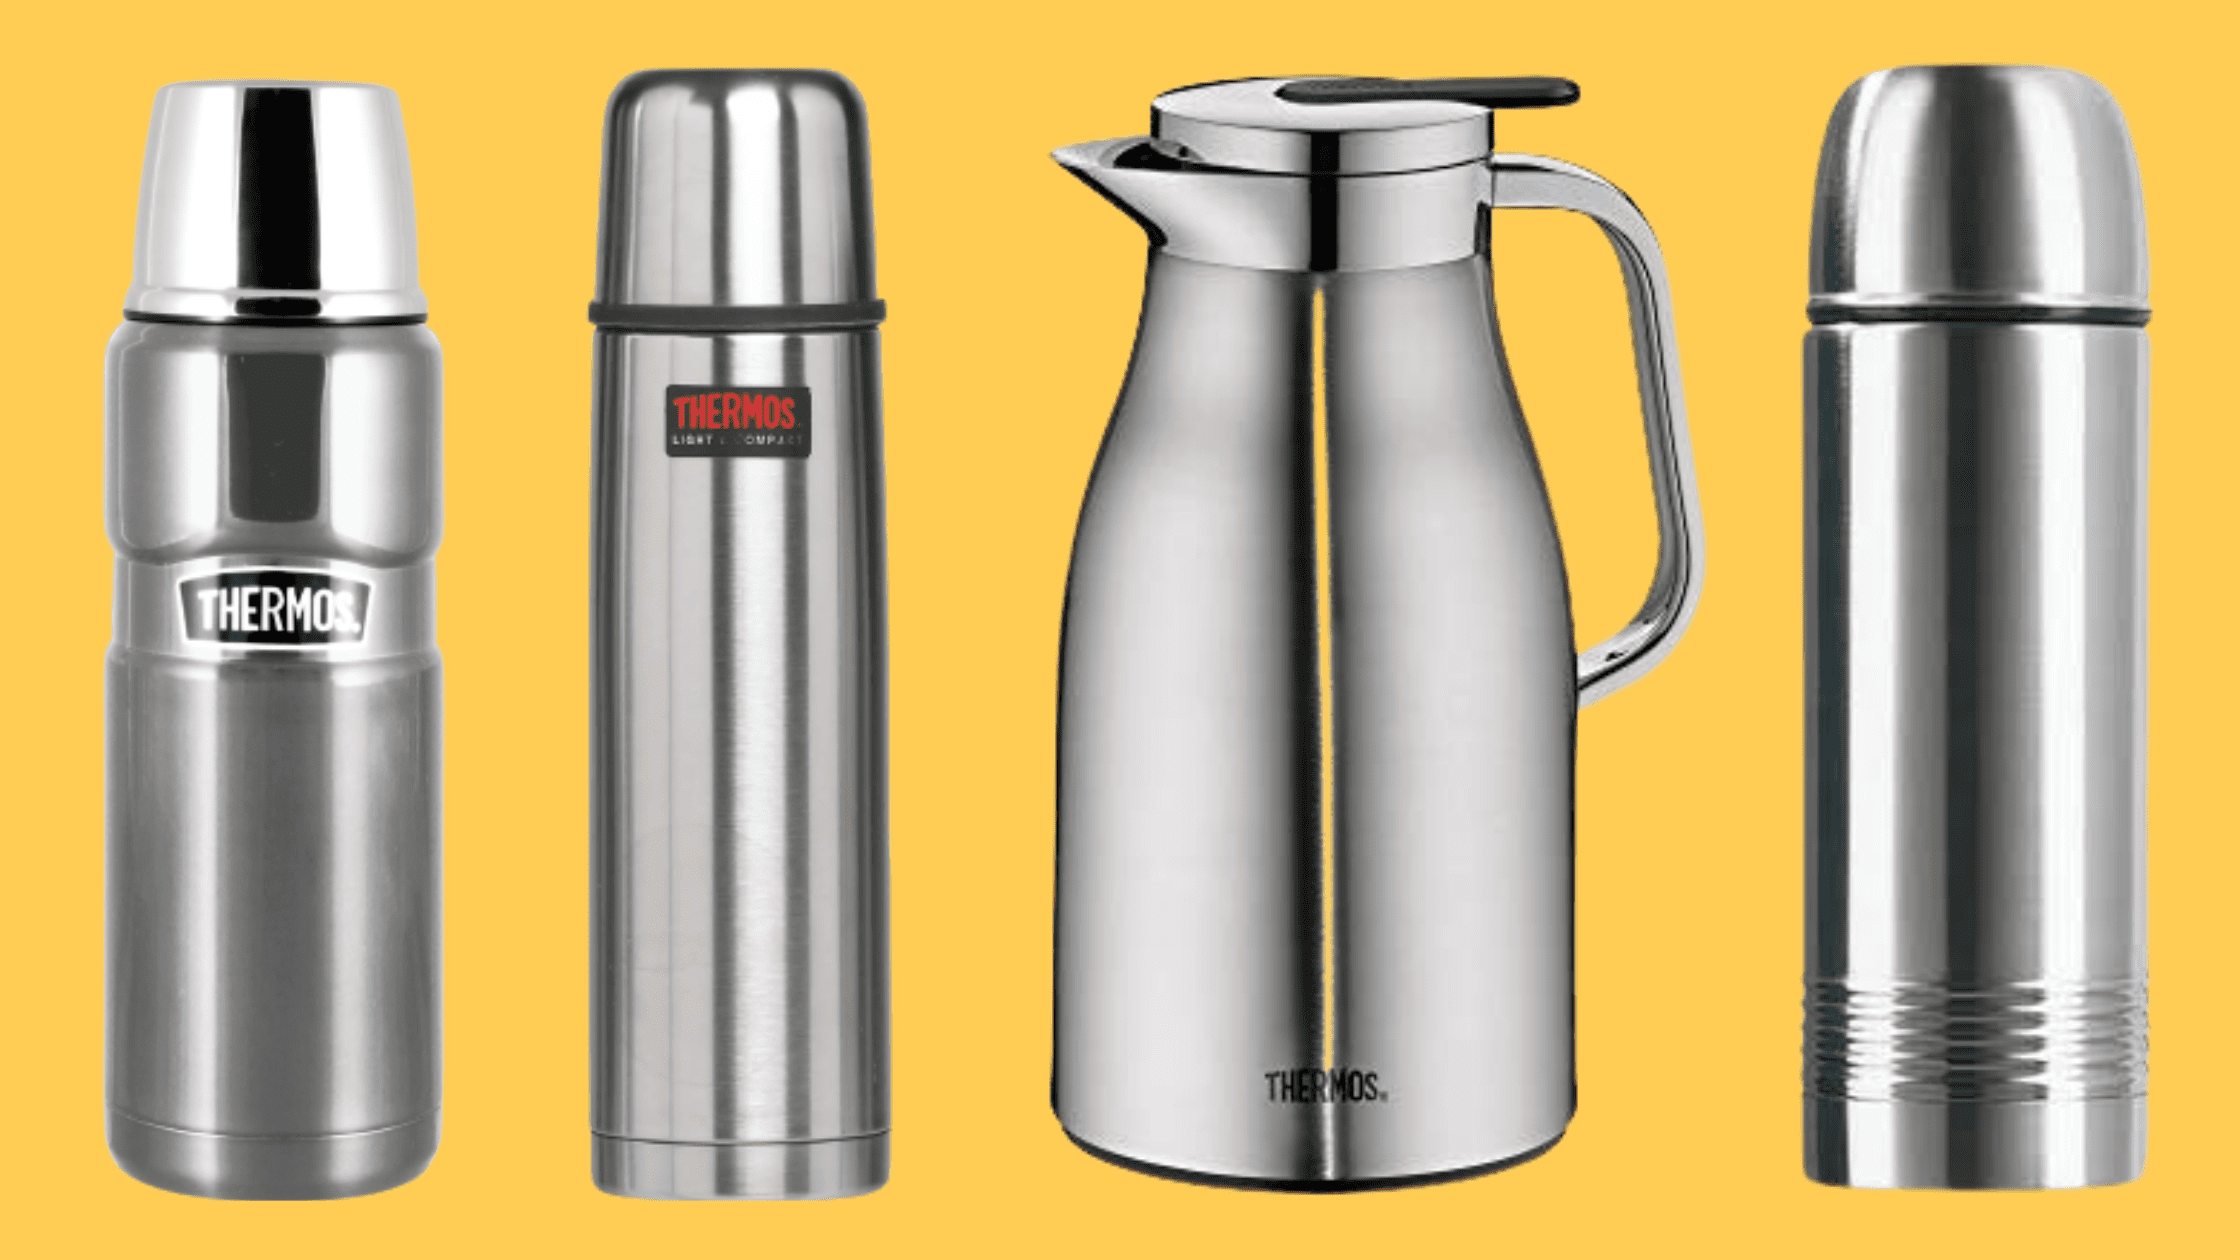 Bouteille isotherme Isolation Cafetière Double Couche Acier Inoxydable  Thermos, Café Thermos, Coff